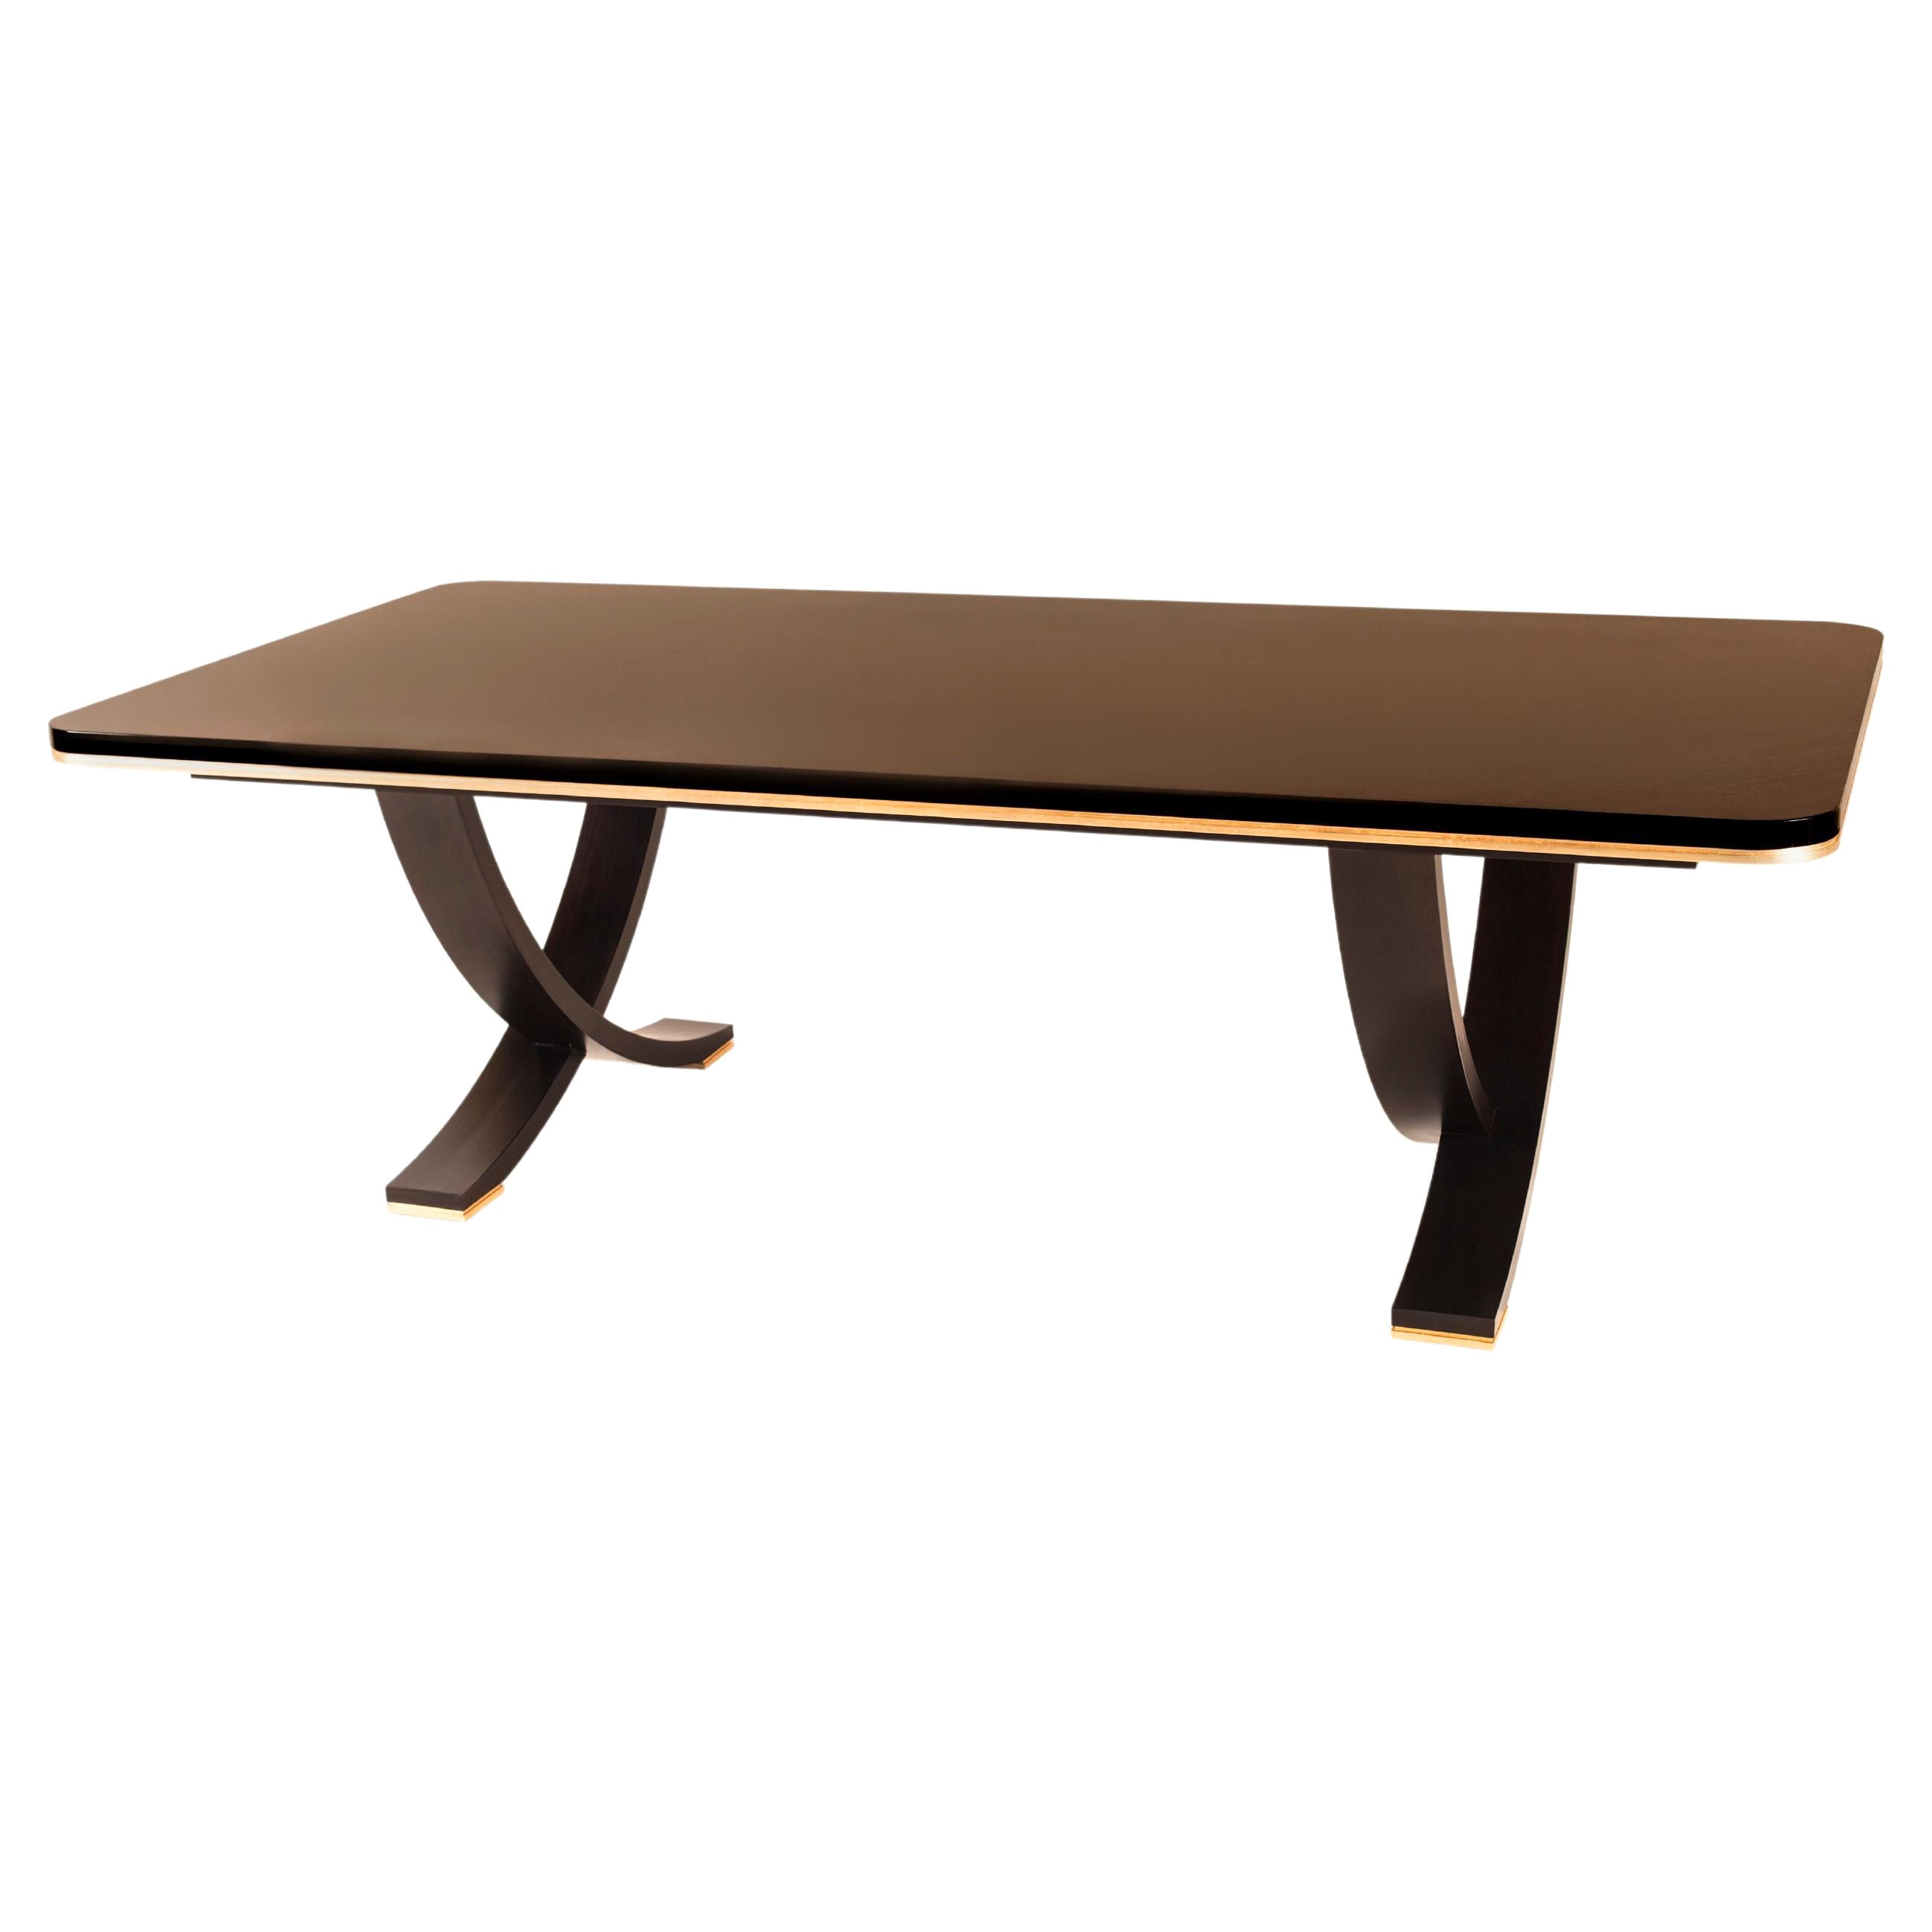 Greenapple Dining Table, Charles Dining Table 8-Seat, Handmade in Portugal